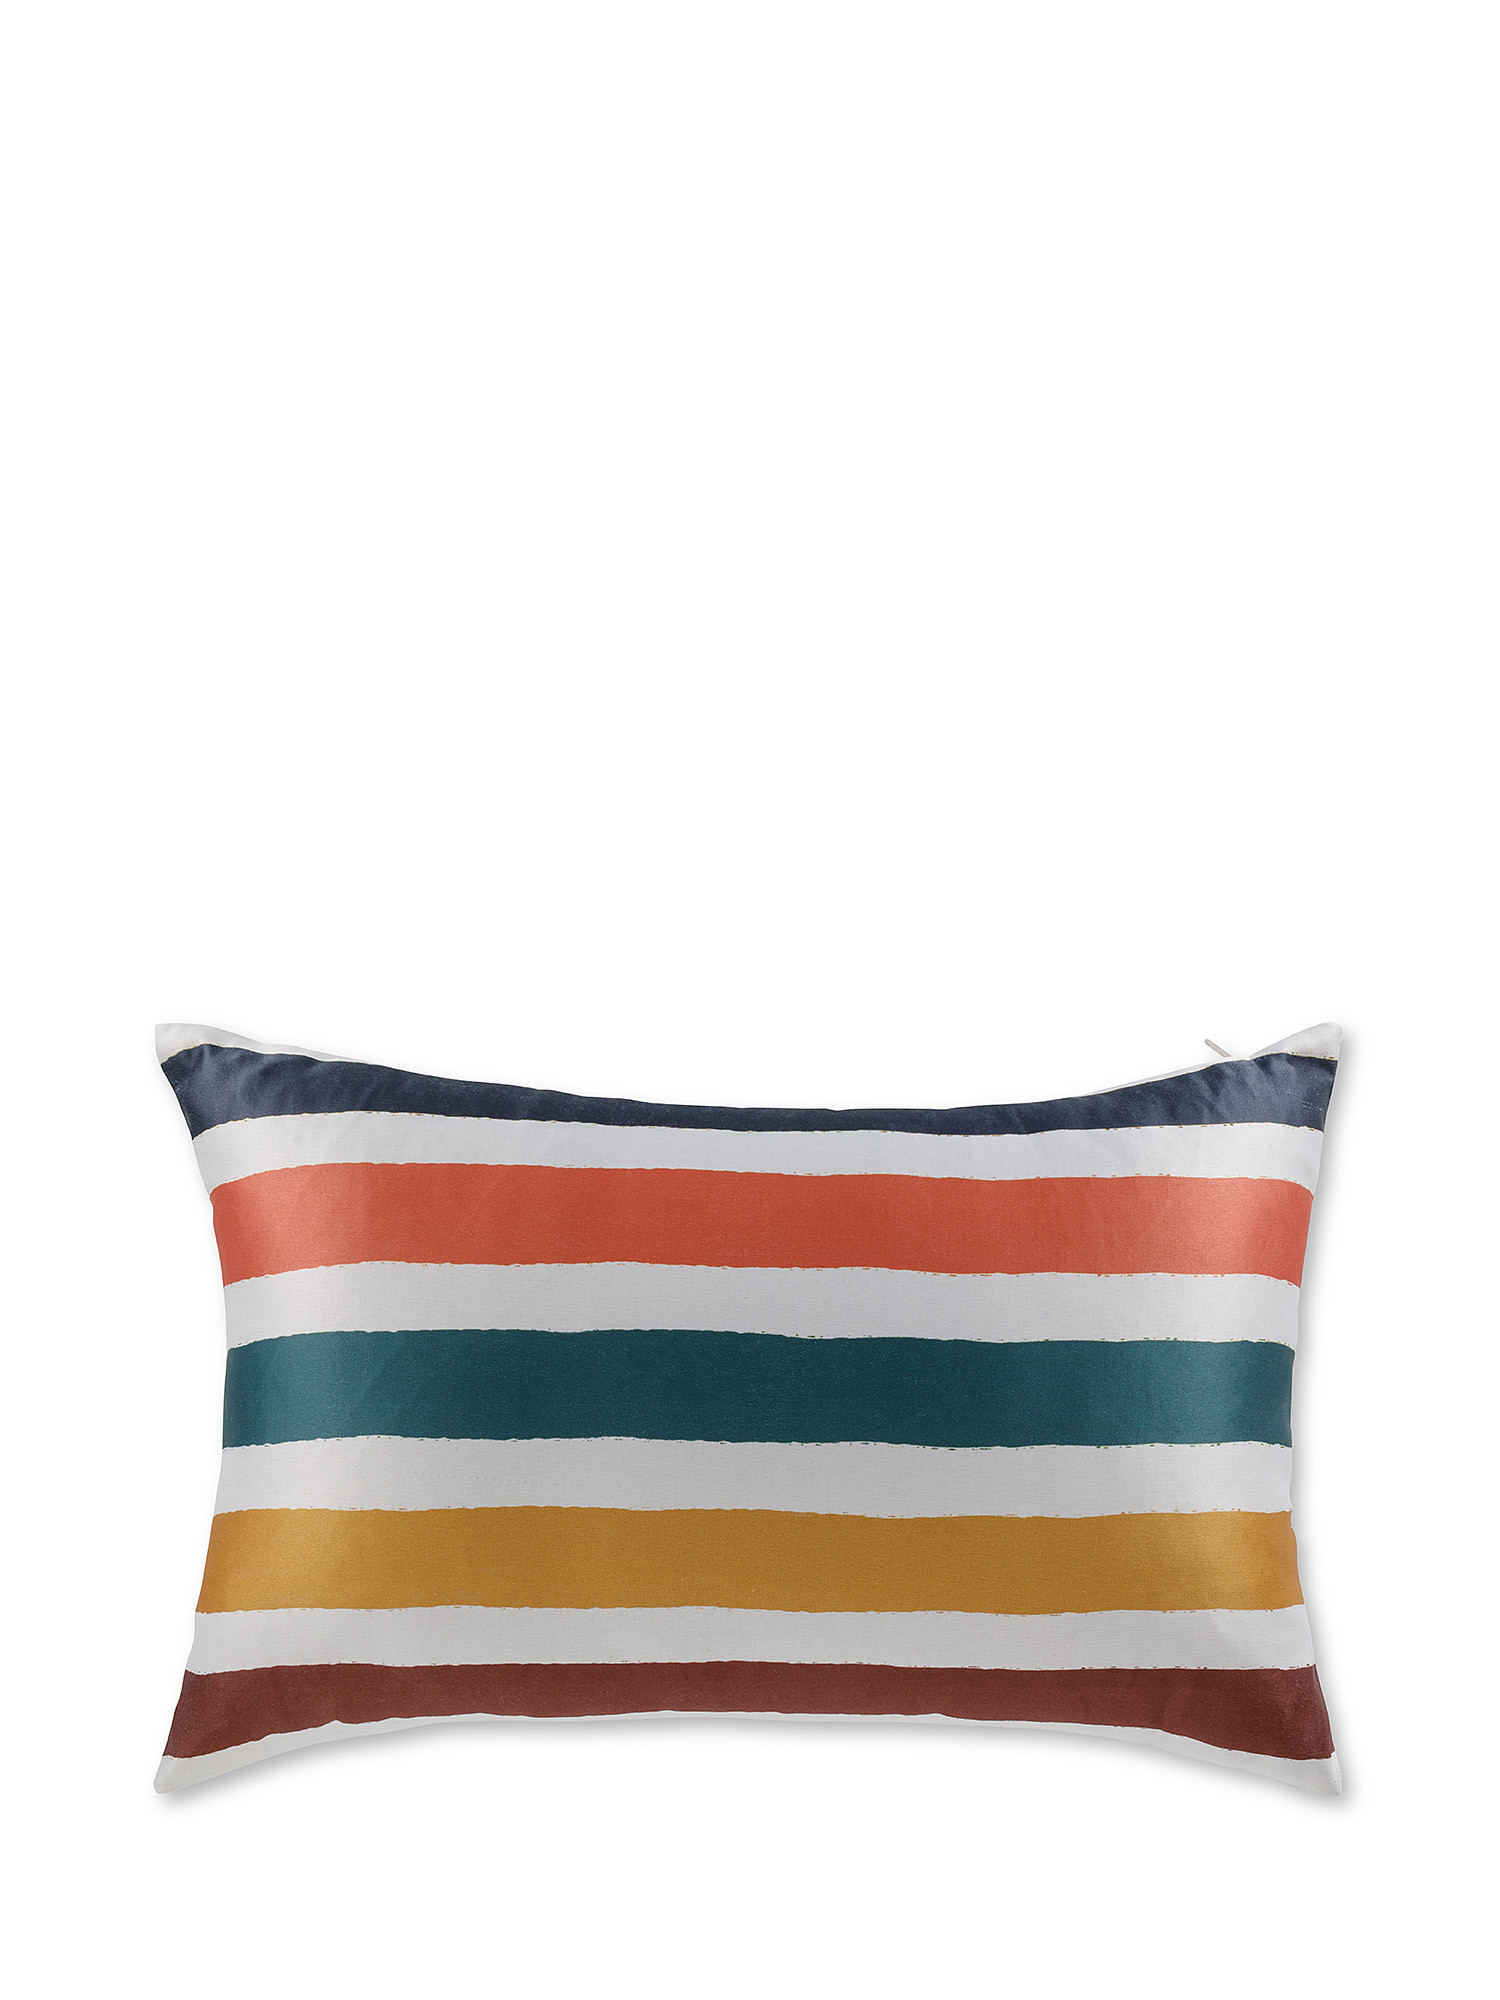 Striped satin effect cushion 35x55cm, Multicolor, large image number 0